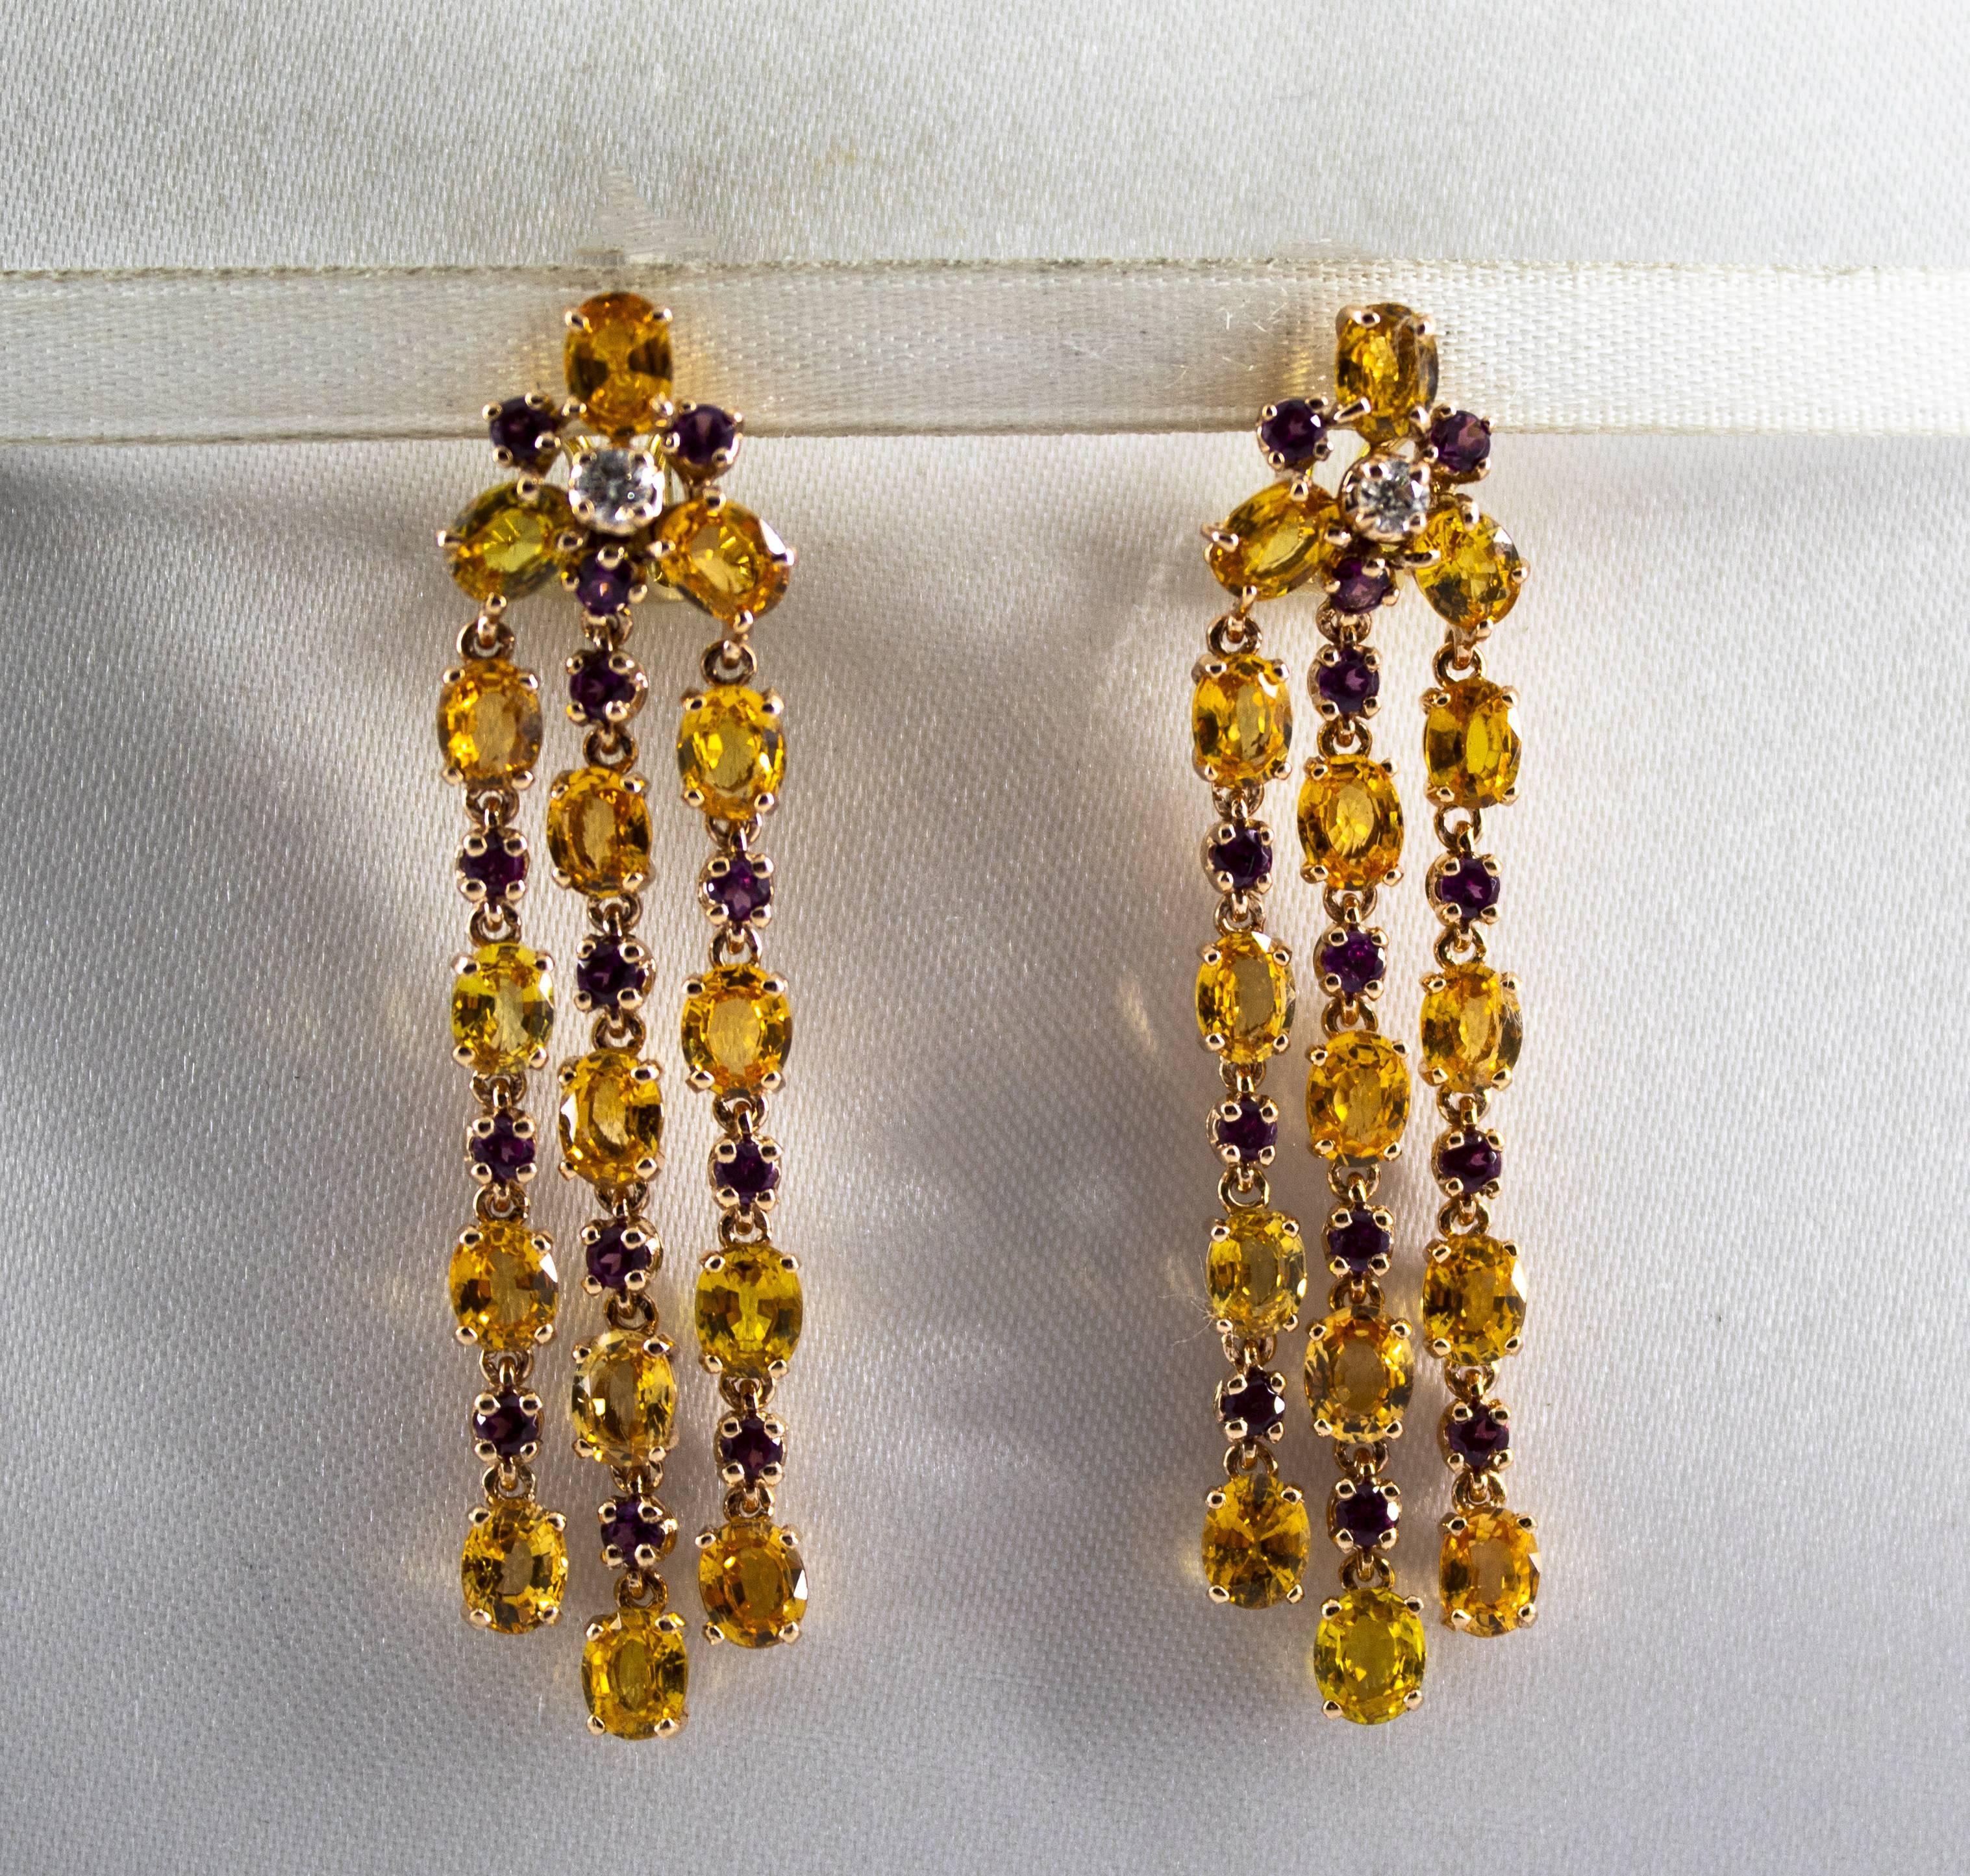 These Earrings are made of 14K Yellow Gold with 18K Yellow Gold Clips.
These Earrings have 0.14 Carats of White Diamonds.
These Earrings have 12.50 Carats of Yellow Sapphires.
These Earrings have 1.10 Carats of Rhodolite Garnets.
All our Earrings